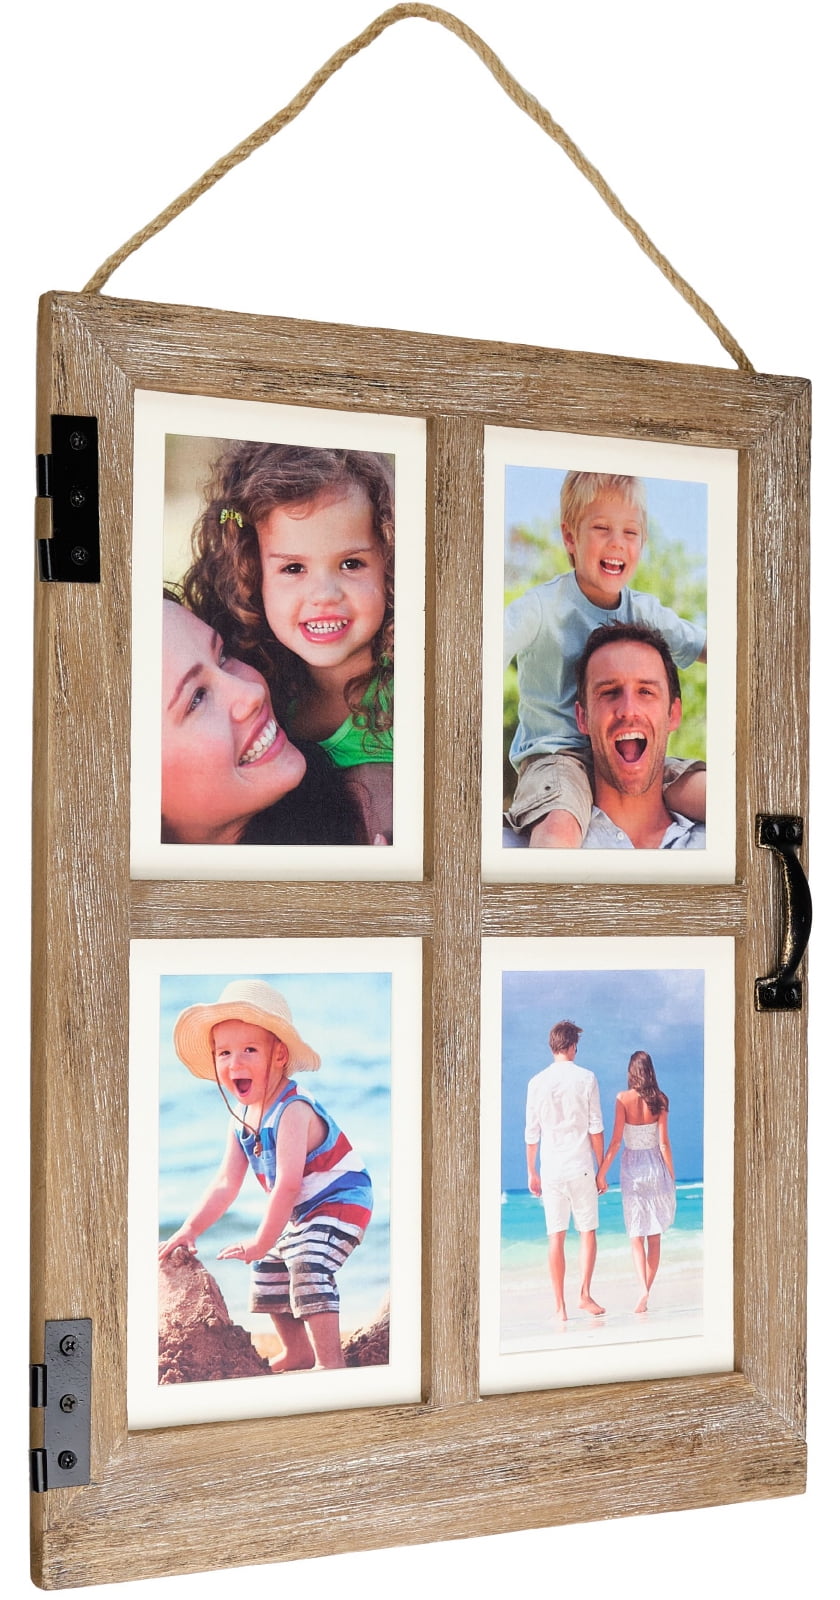 Excello Global Products Folding Wooden Collage Photo Frame, Holds 3x5 and 5x7 Photos, Desk Stand or Wall Mount, Black and White